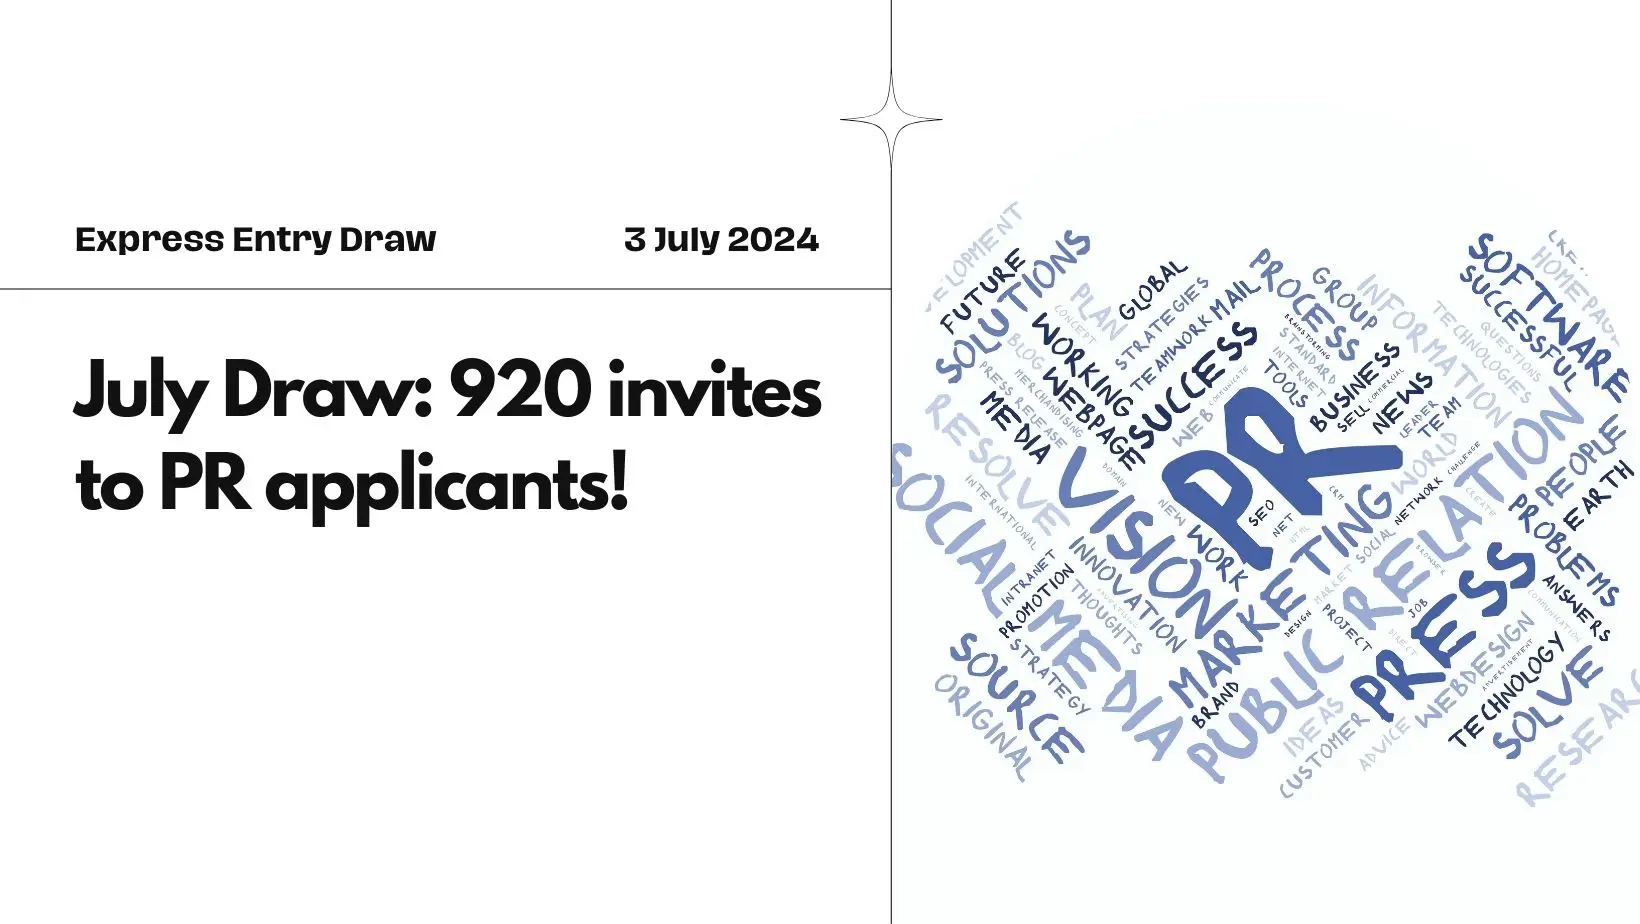 First Express Entry Draw in July Invites 920 PR Applicants